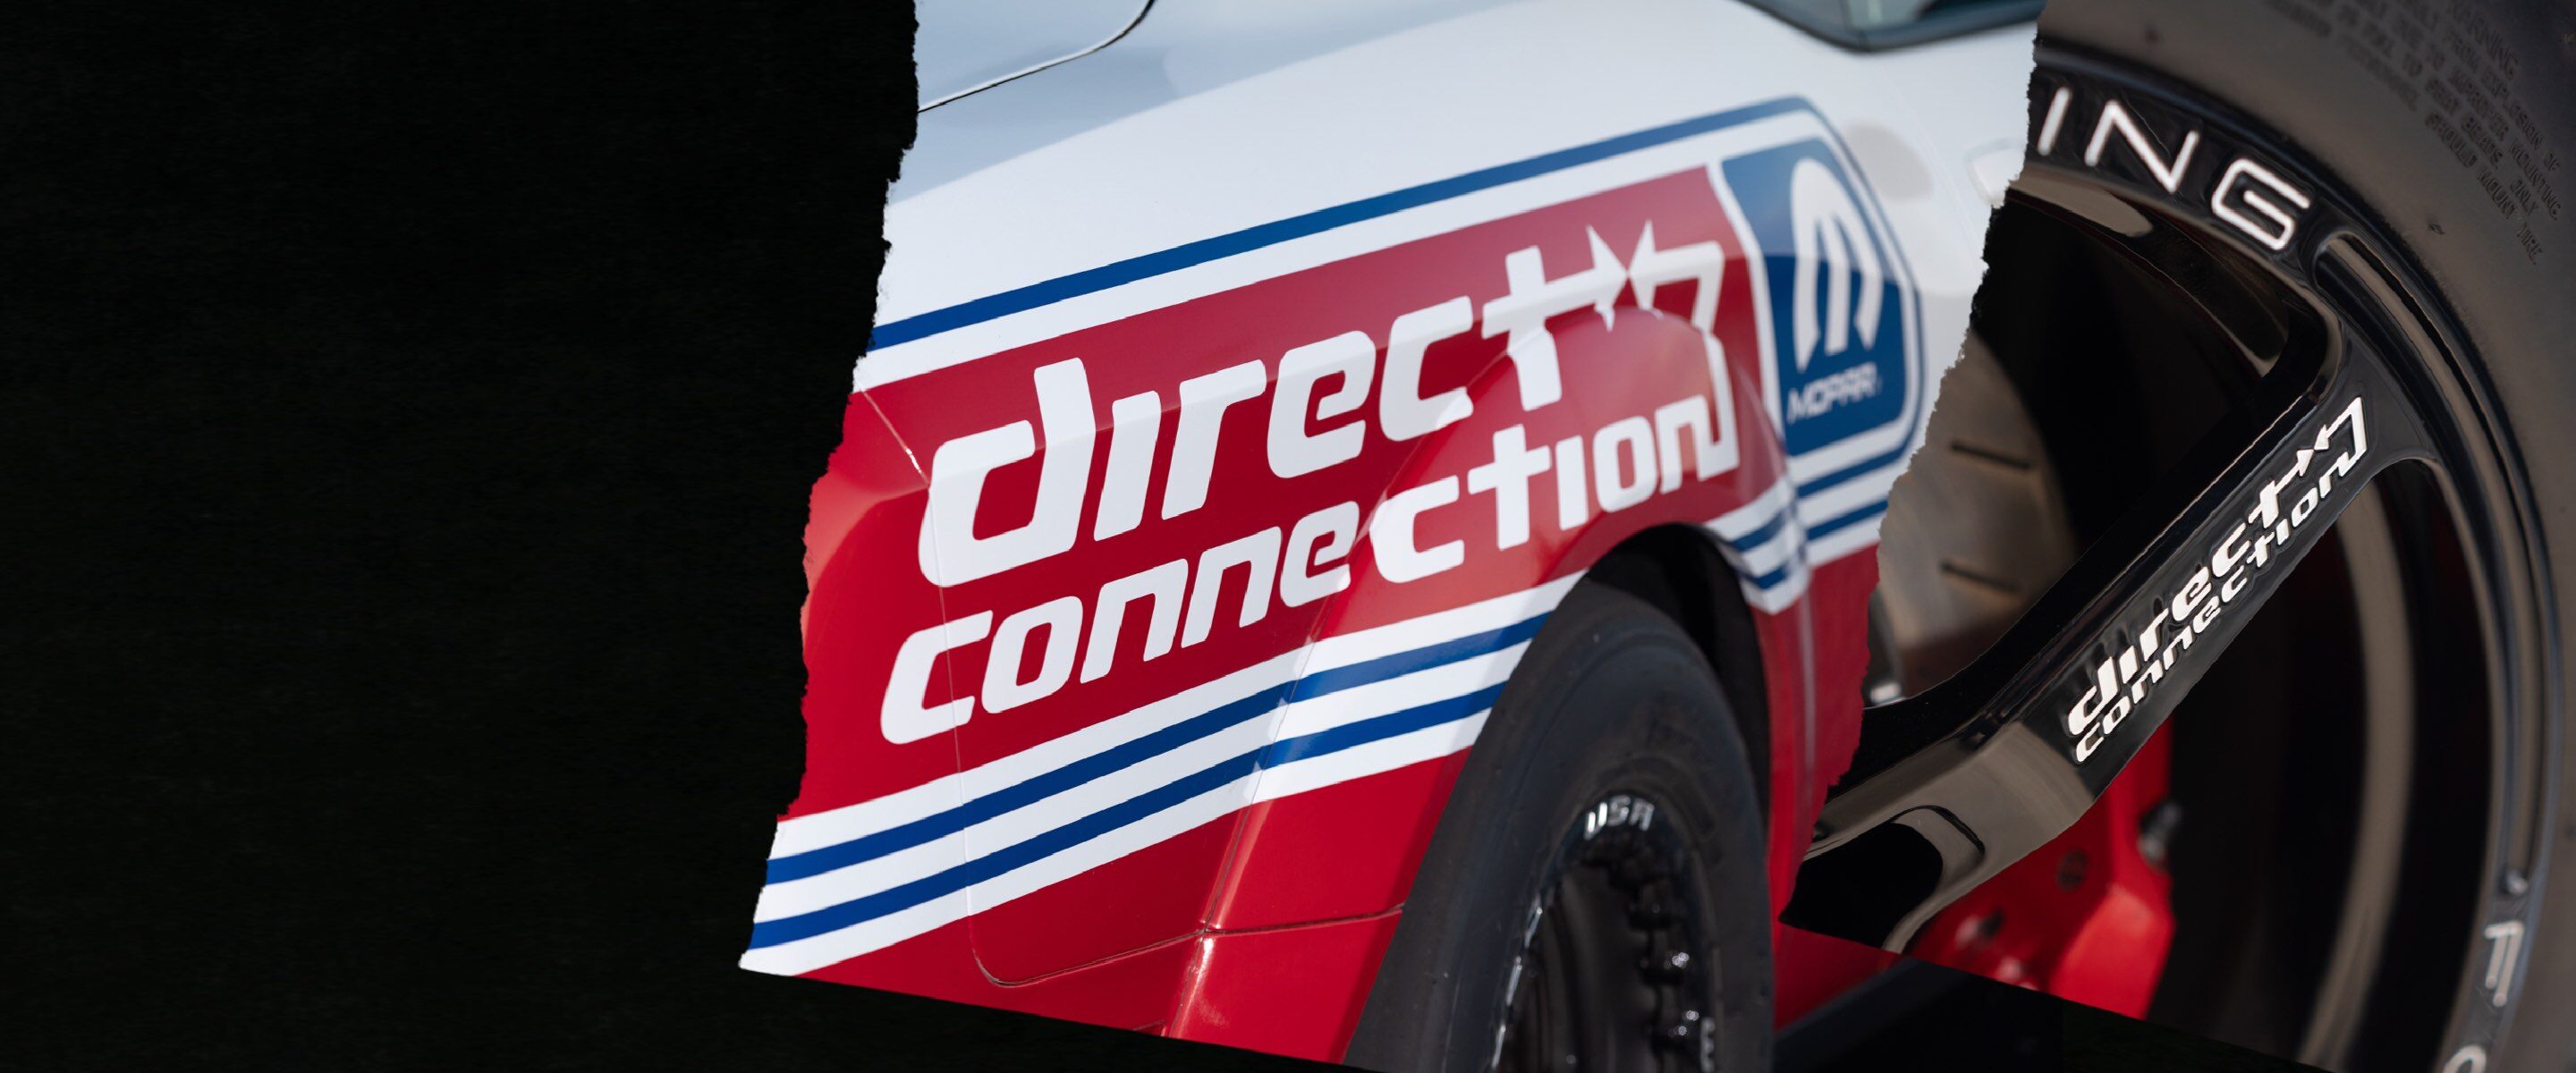 A close-up of a racecar with a Mopar Direct Connection decal on the side.